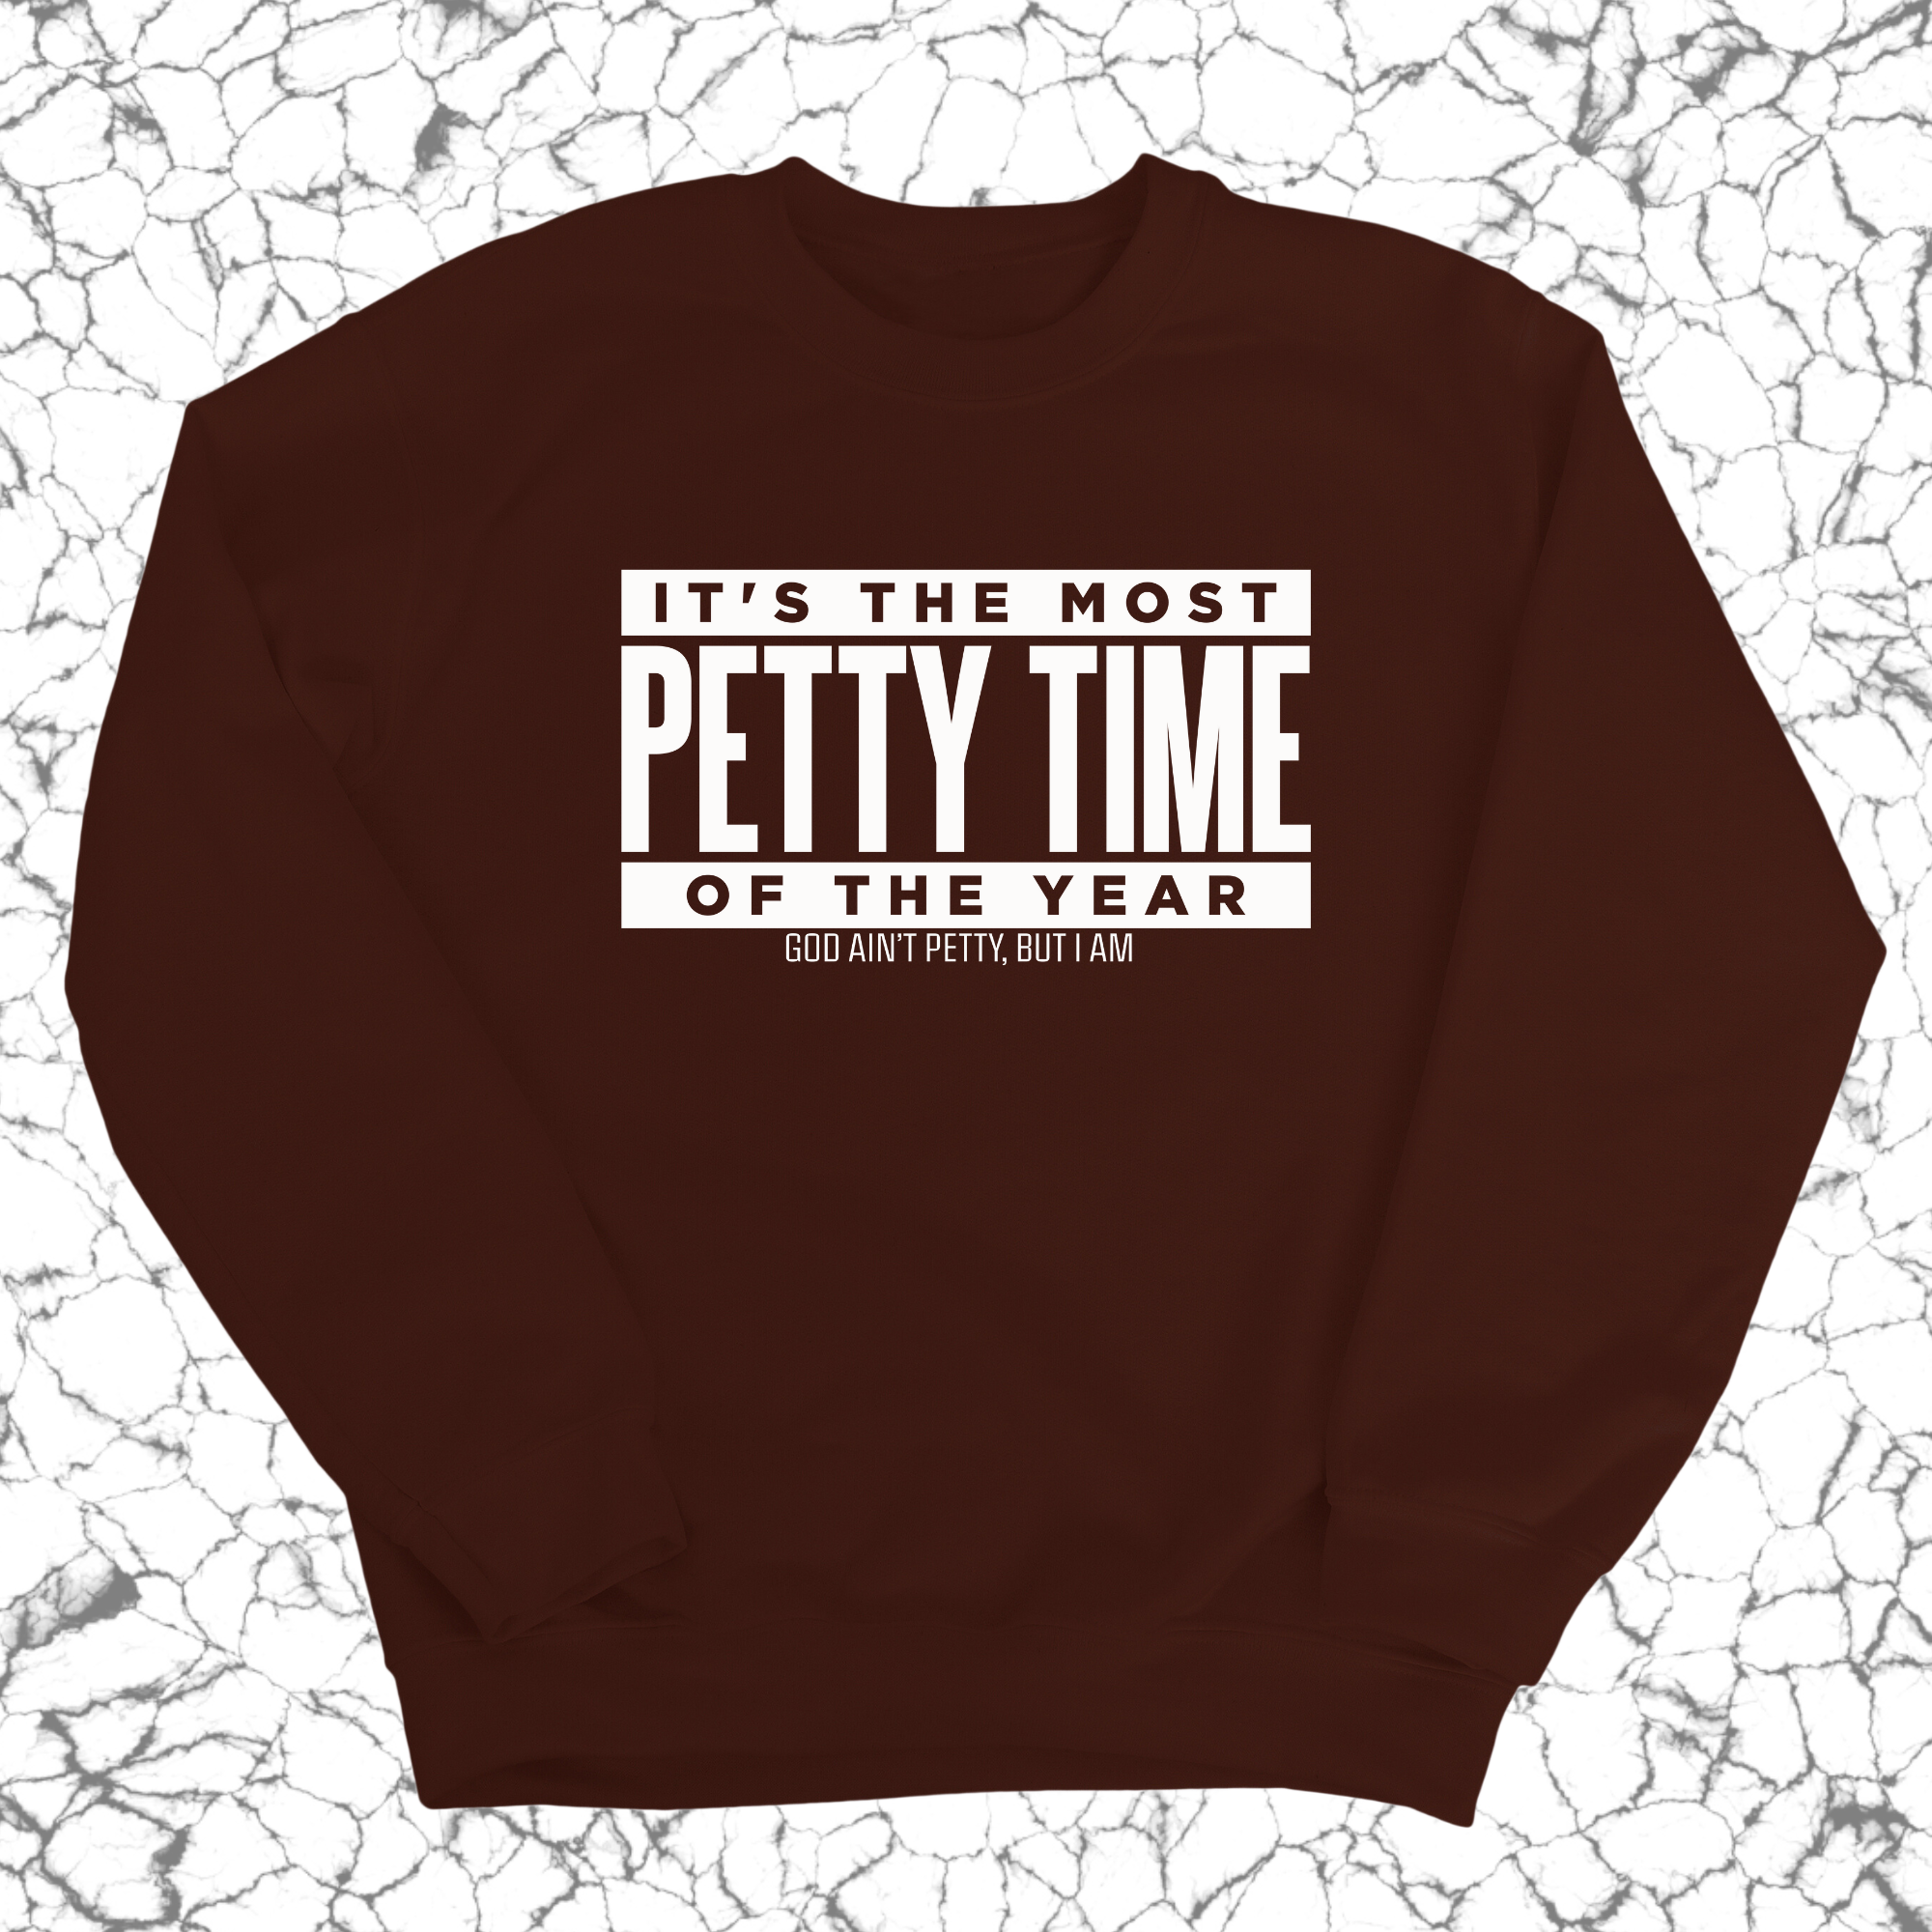 It's the Most Petty time of the Year Unisex Sweatshirt-Sweatshirt-The Original God Ain't Petty But I Am